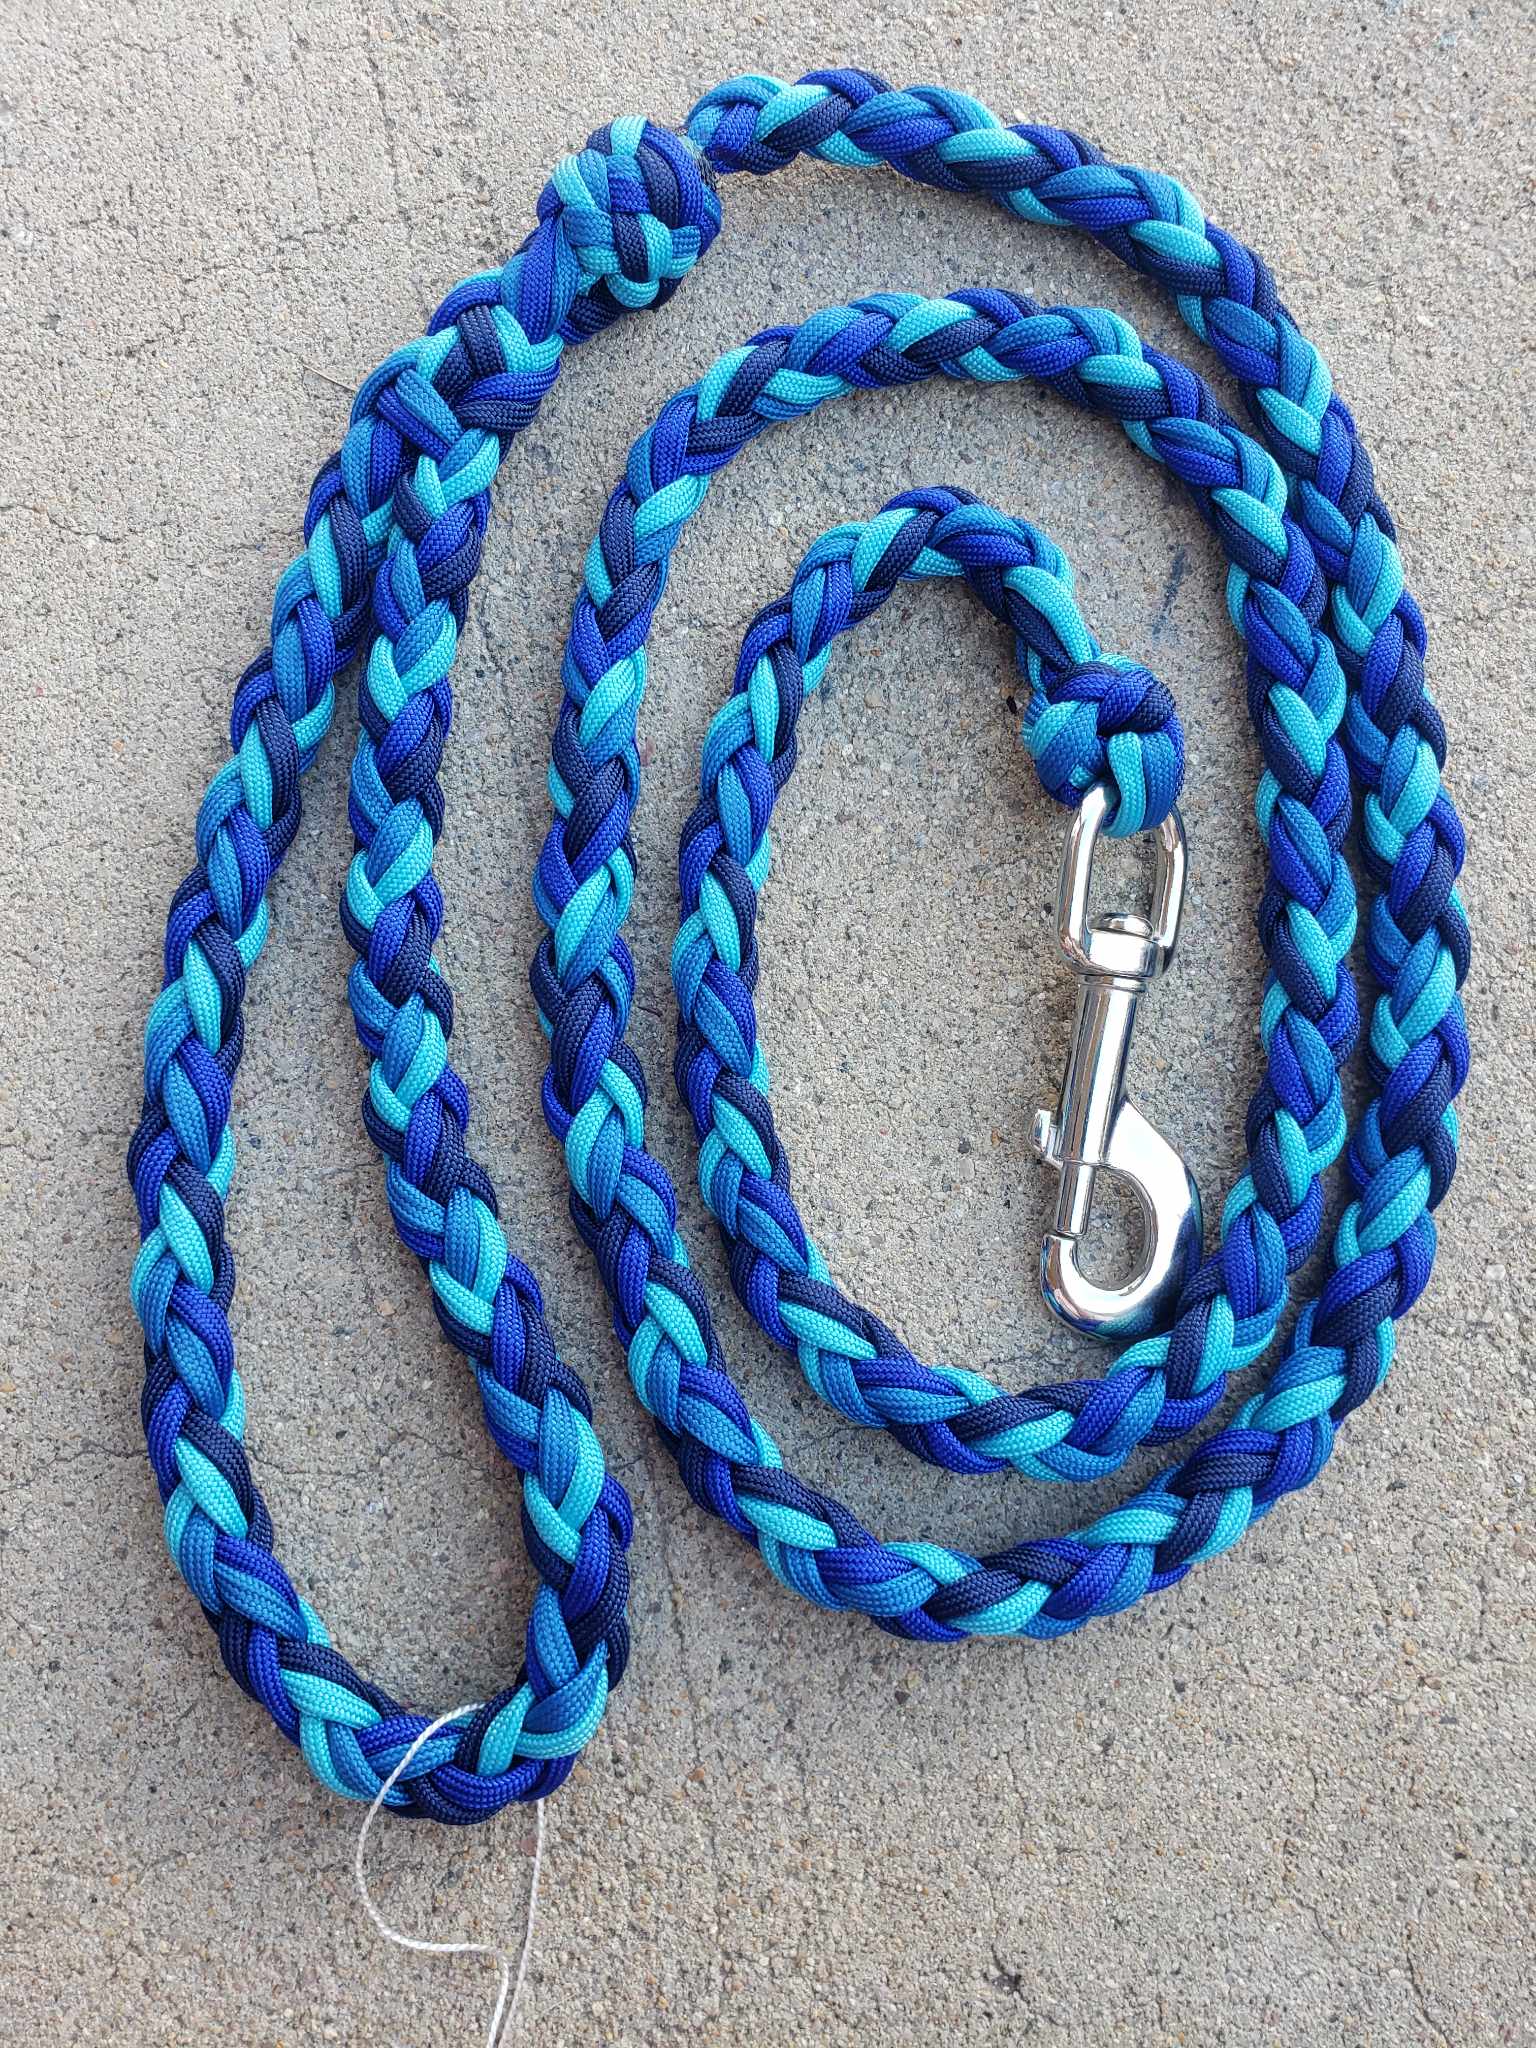 5 Feet Blues Ready to Ship Paracord Leash – High Tails Paracord